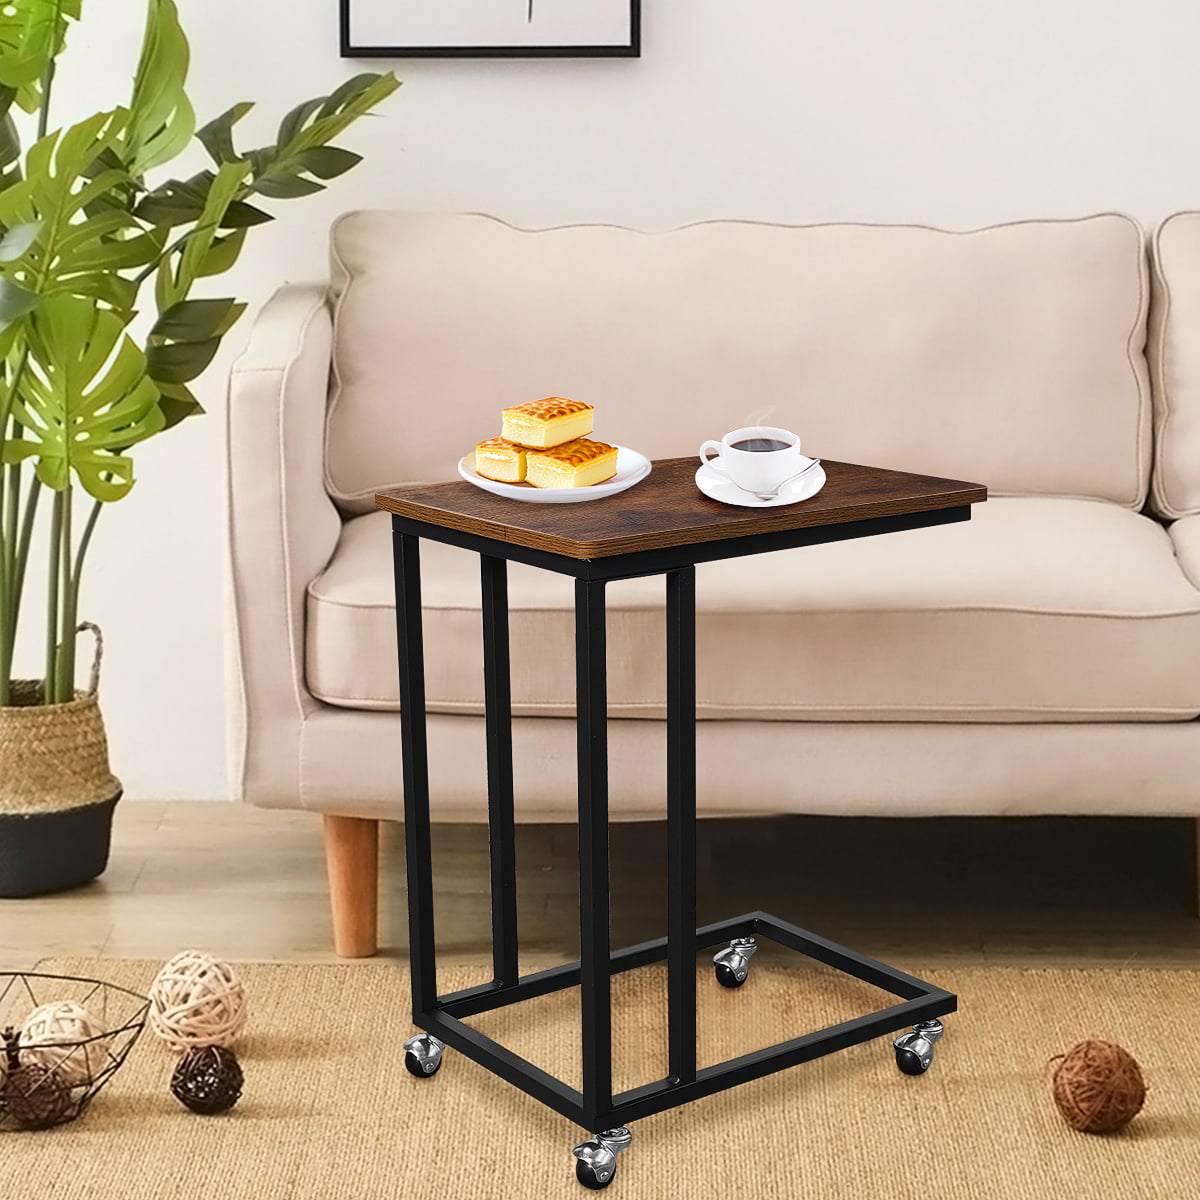 C Shaped End Tables Living Room Sofa Table Coffee Table Snack Table Table Trays 